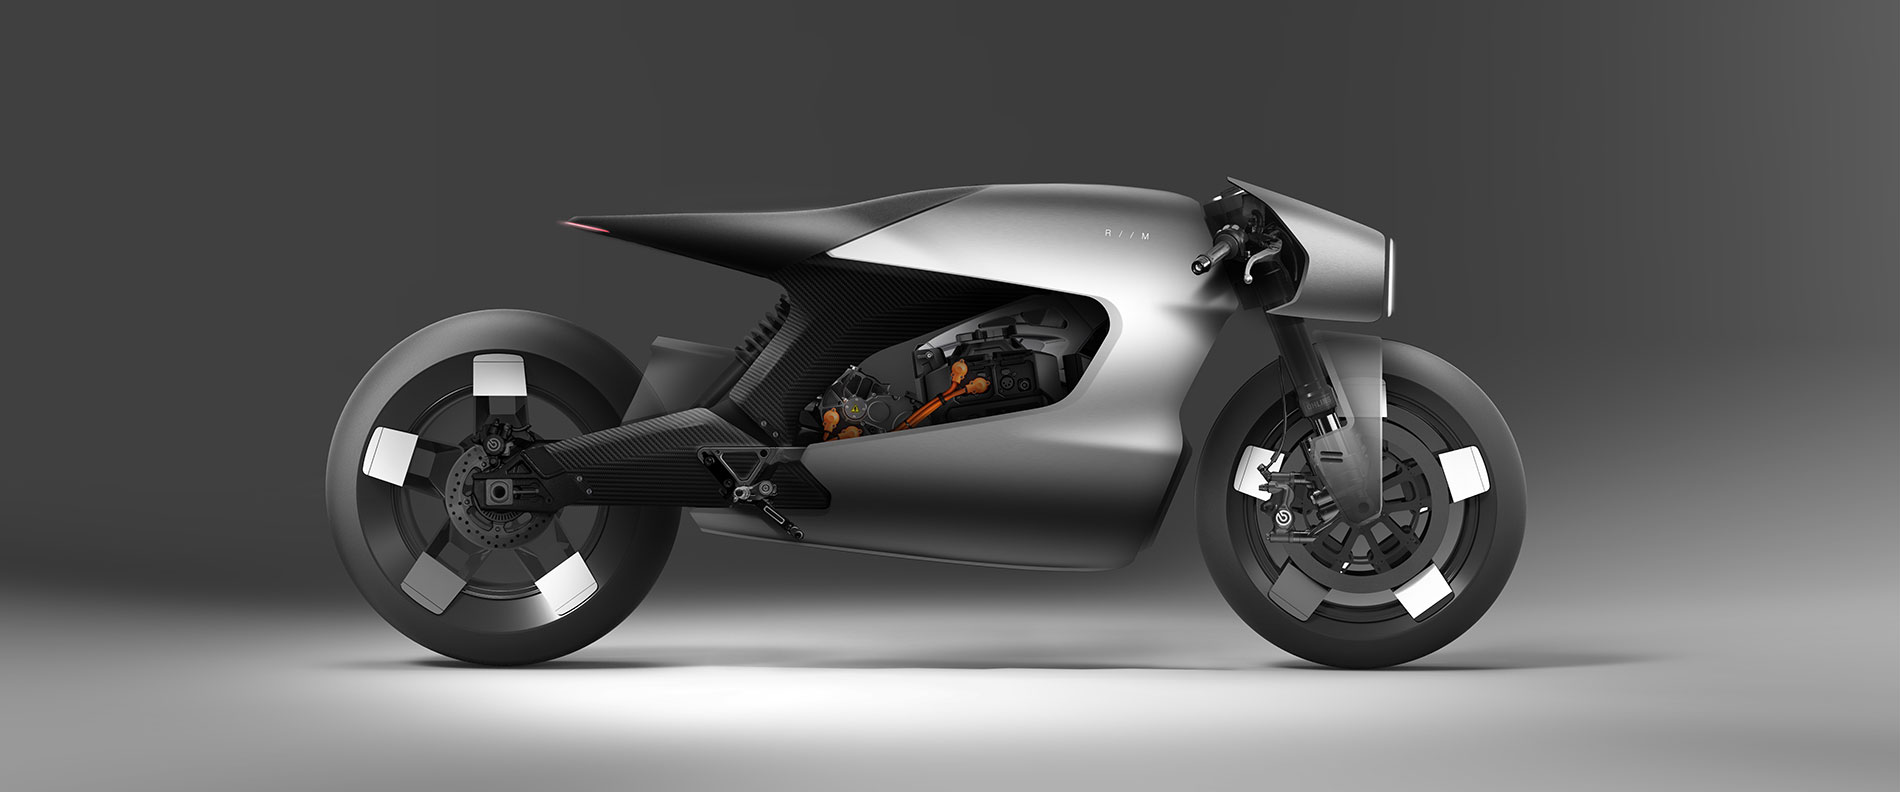 Render of the Ex Machina motorcycle.